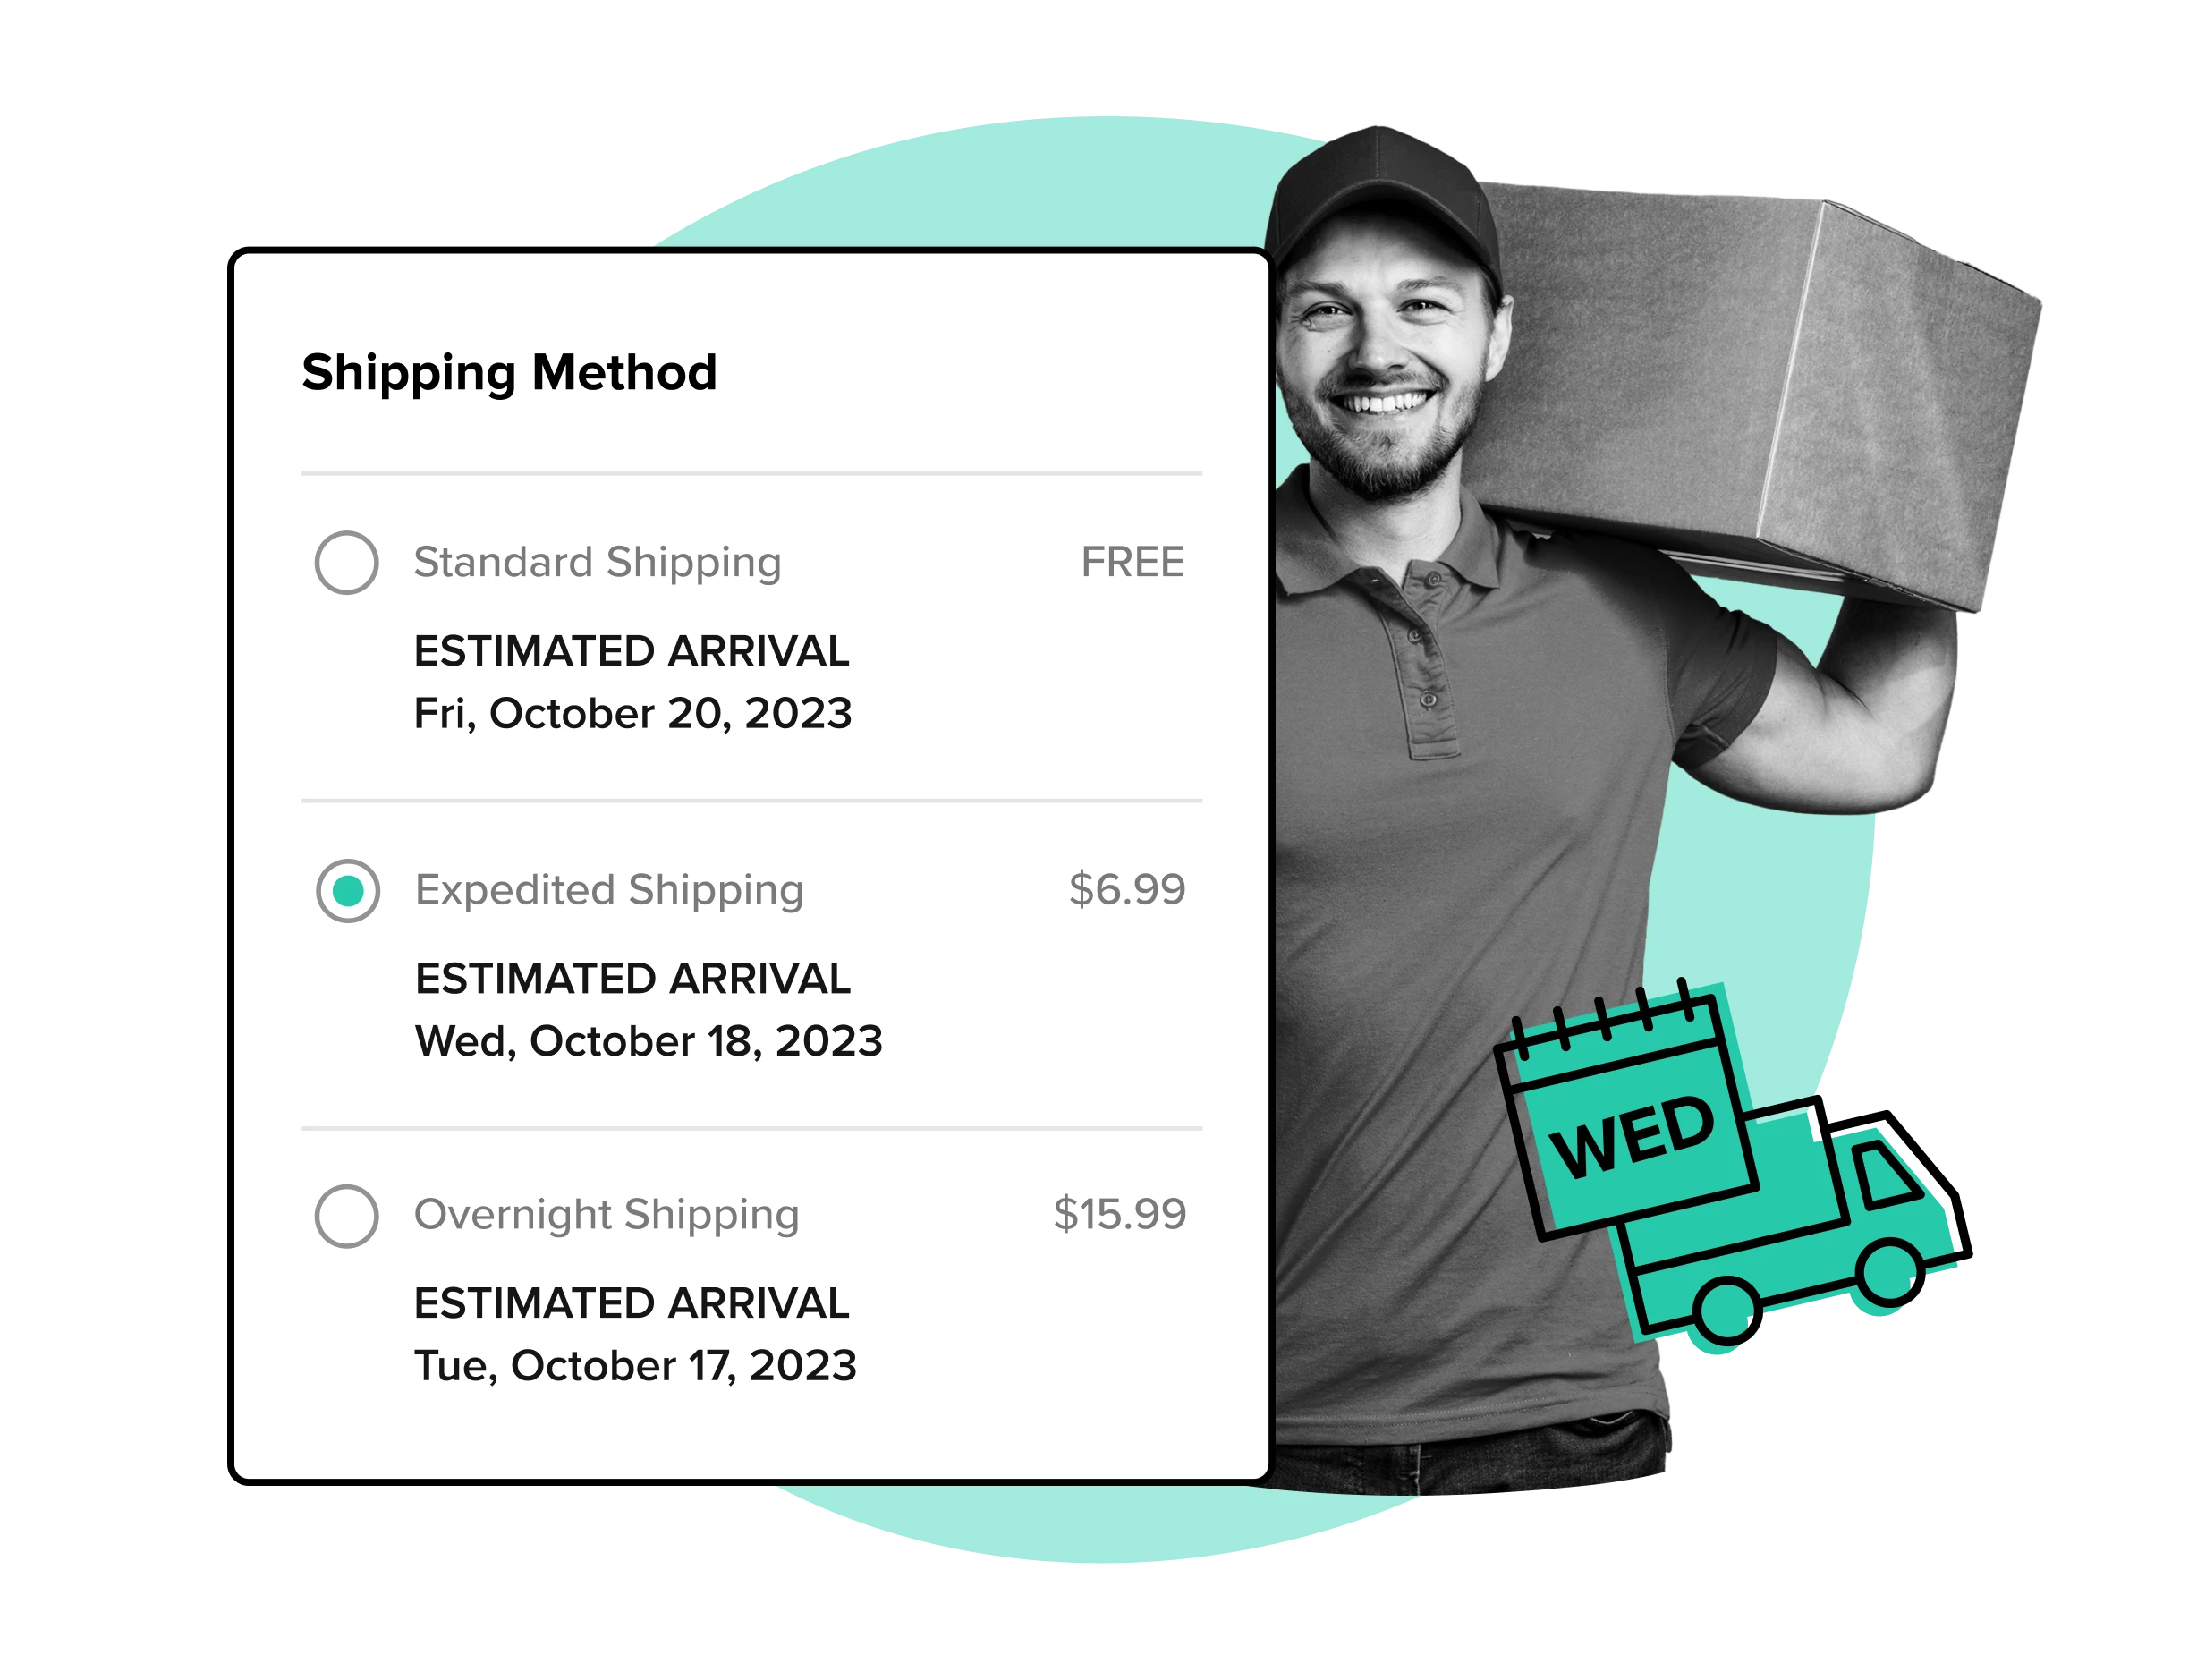 What is Expedited Shipping in 2023? Meaning and Best Practices